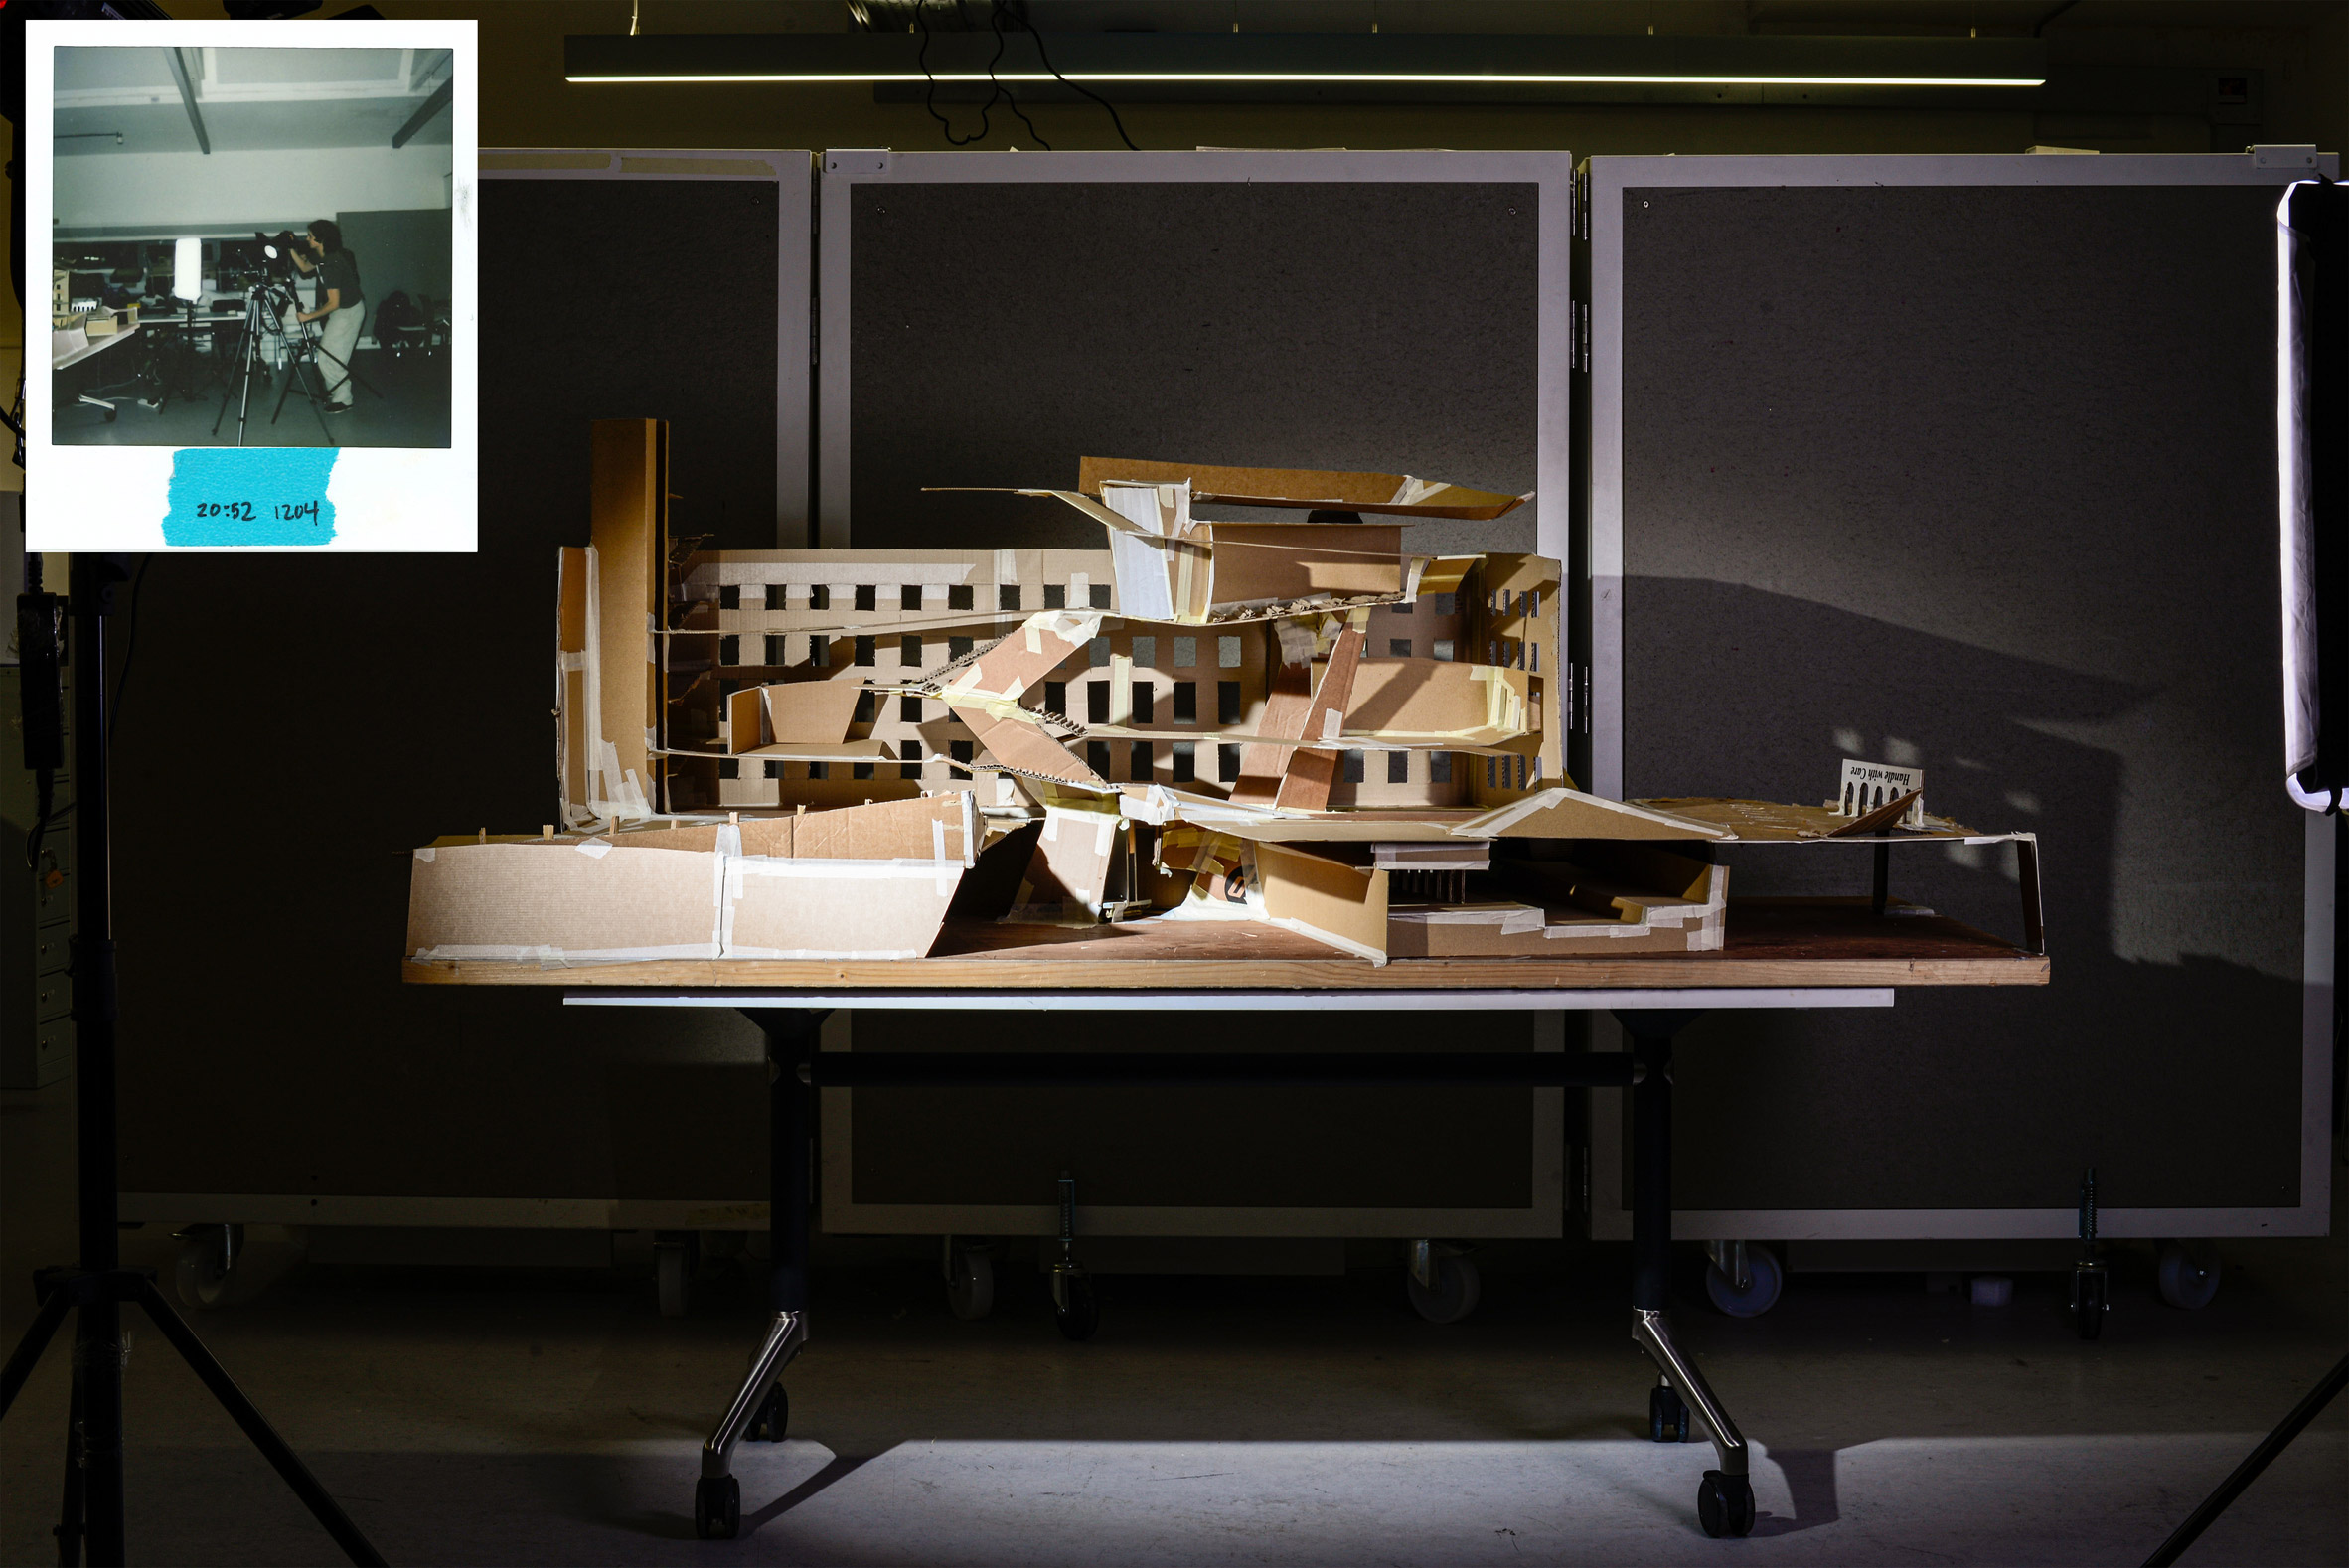 A architectural model of an urban theatre